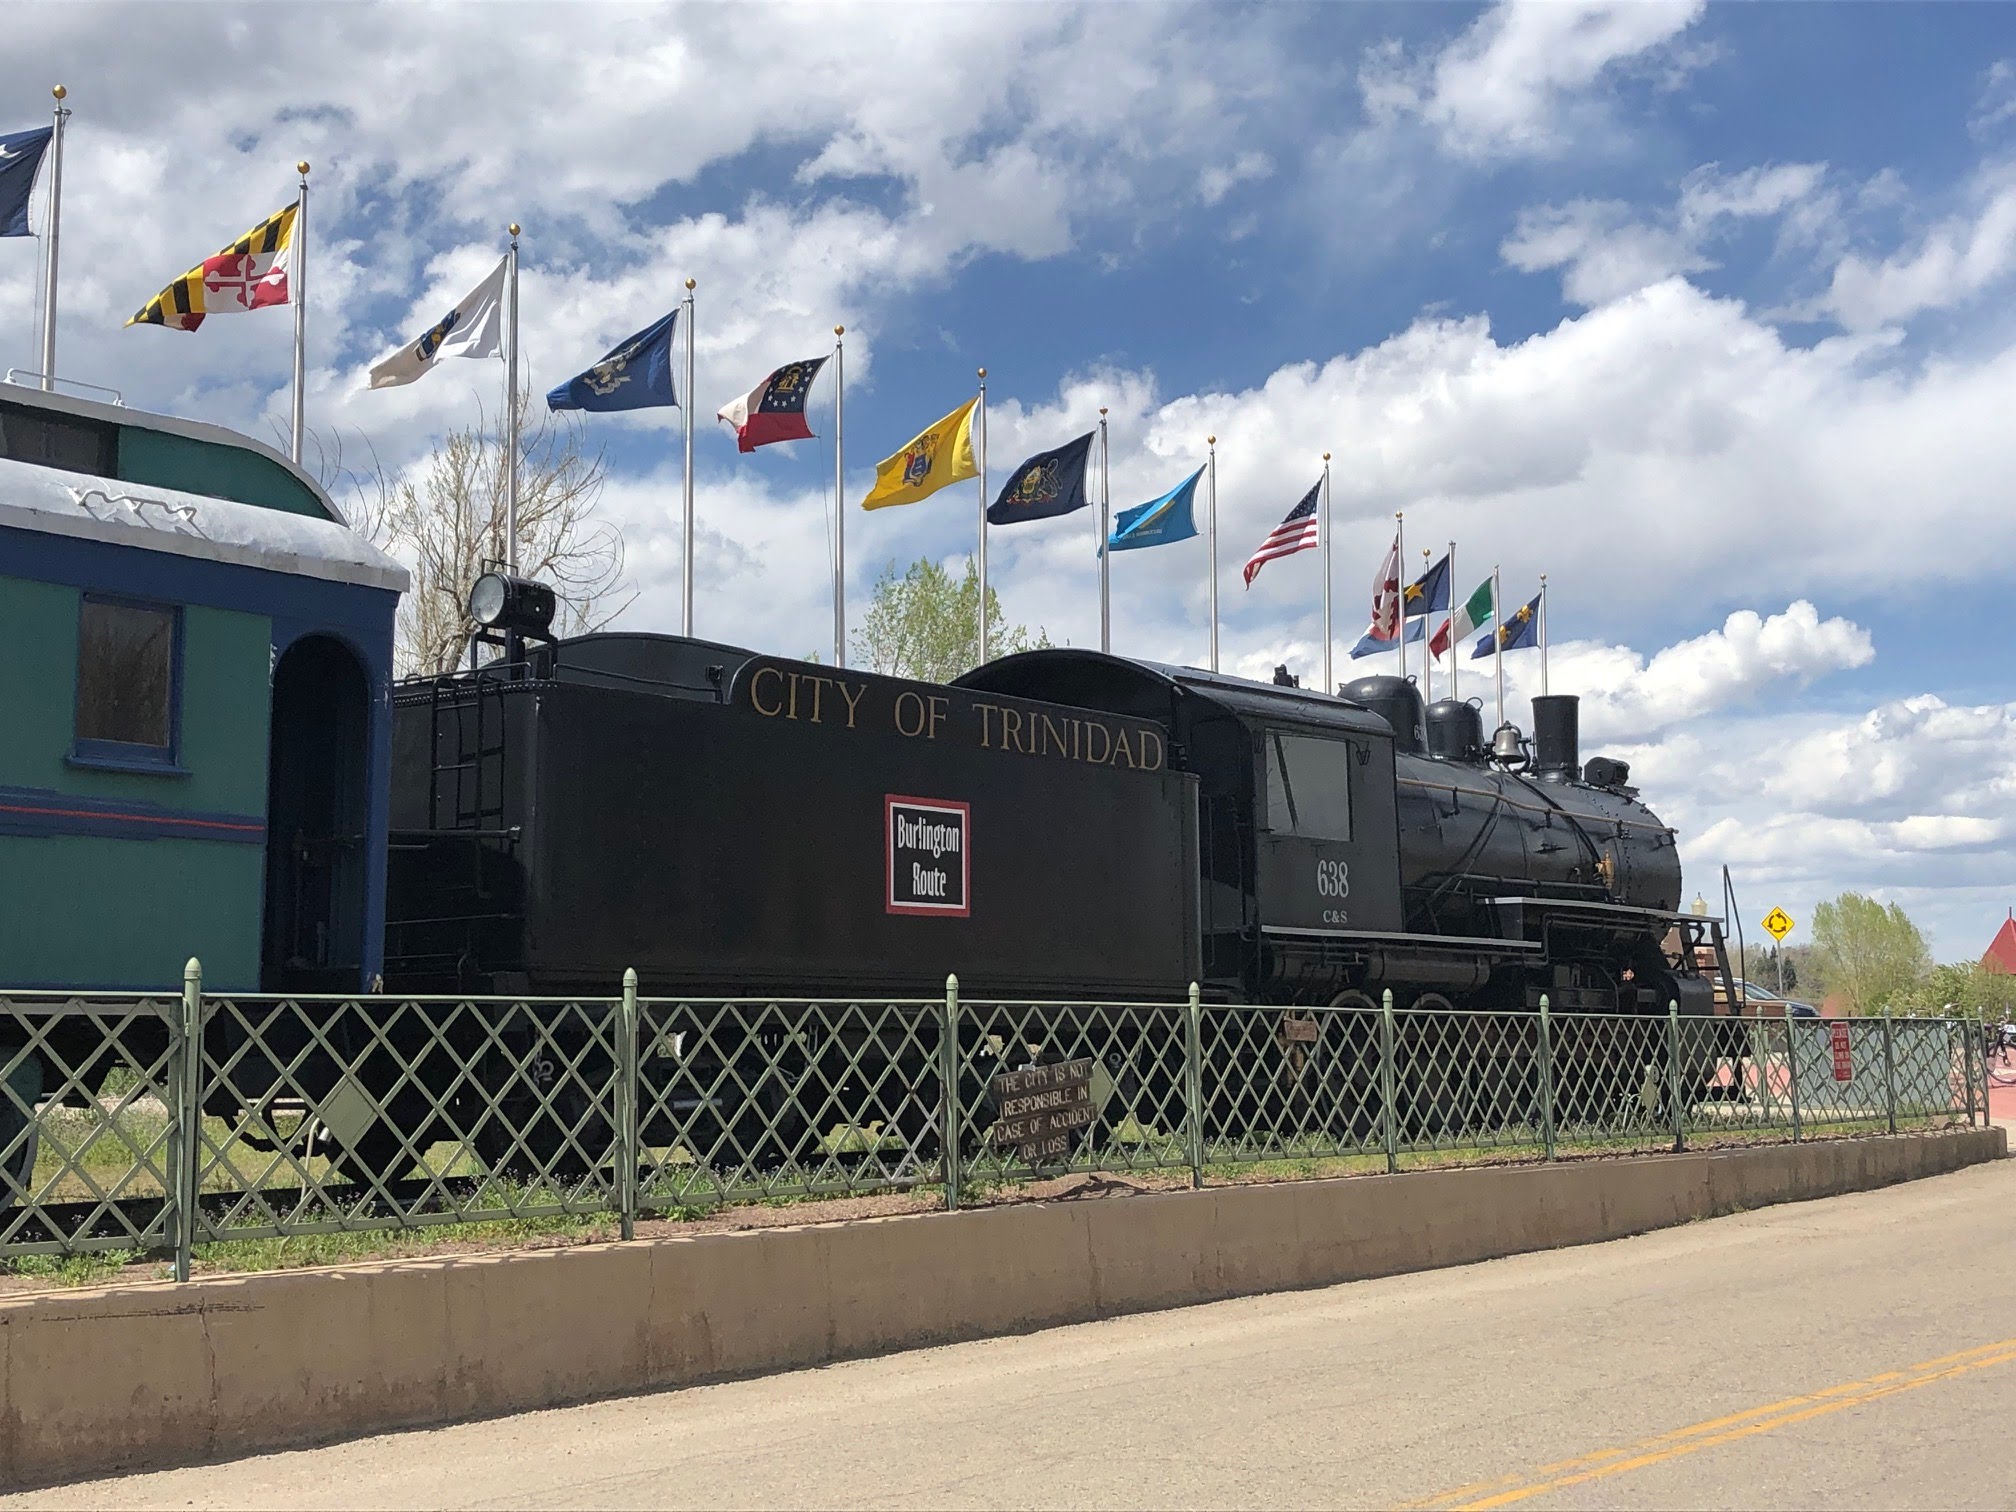 An old steam engine with flags mounted behind it.